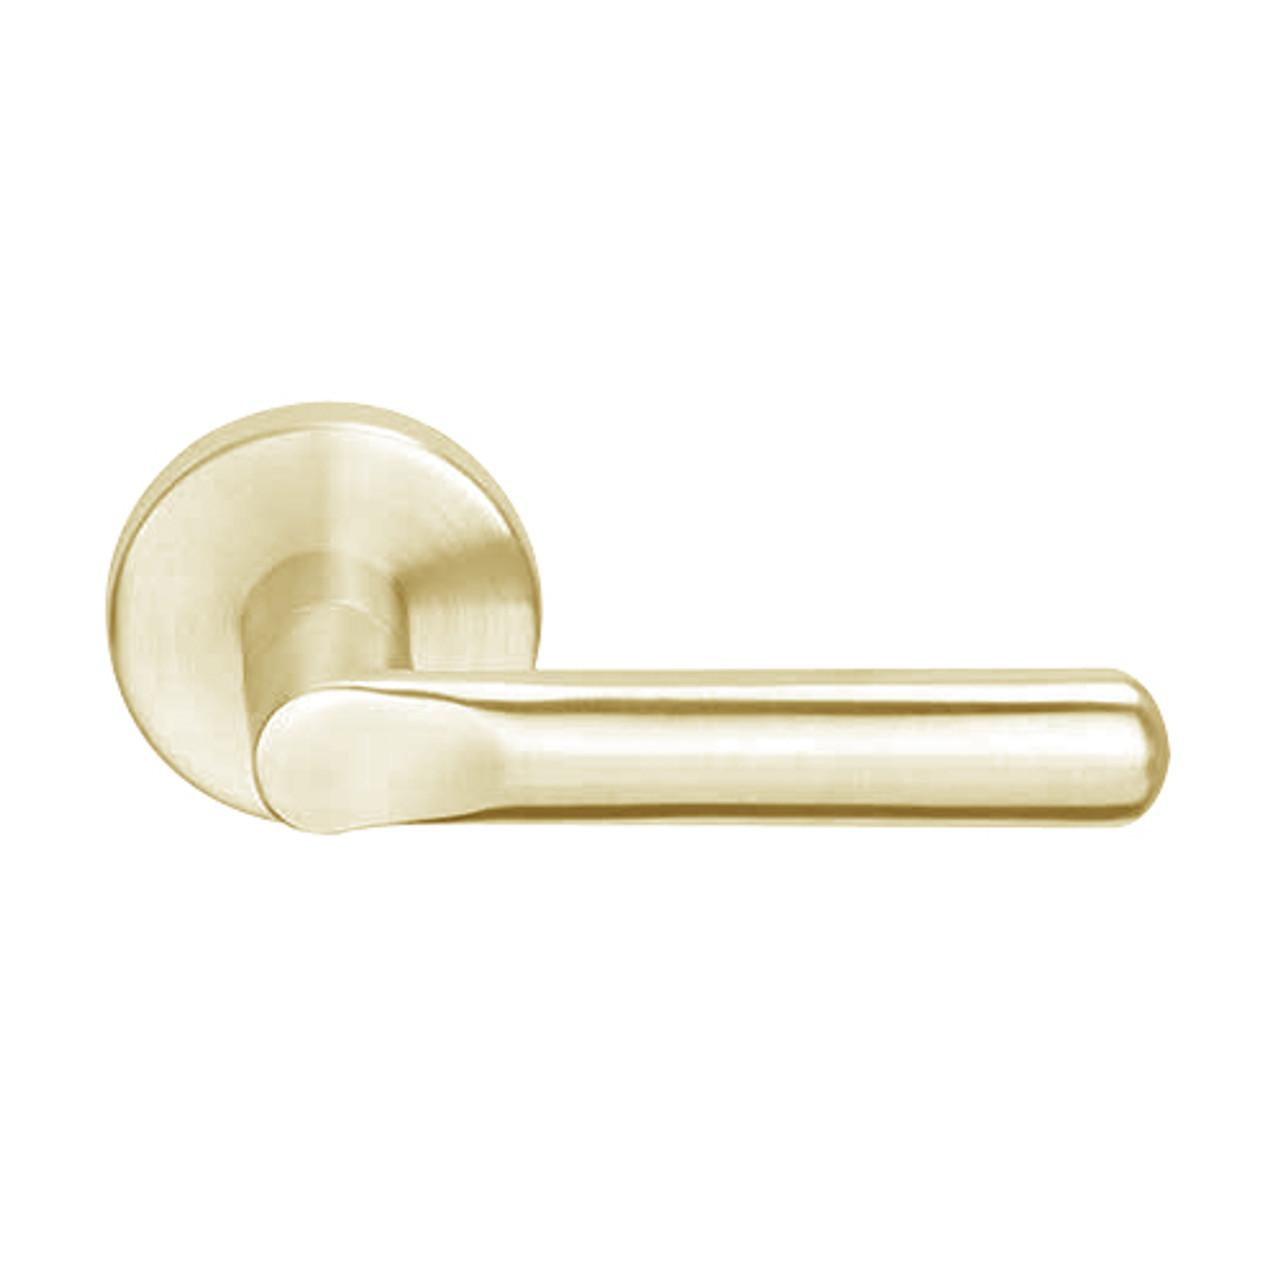 L9050J-18B-606 Schlage L Series Entrance Commercial Mortise Lock with 18 Cast Lever Design Prepped for FSIC in Satin Brass